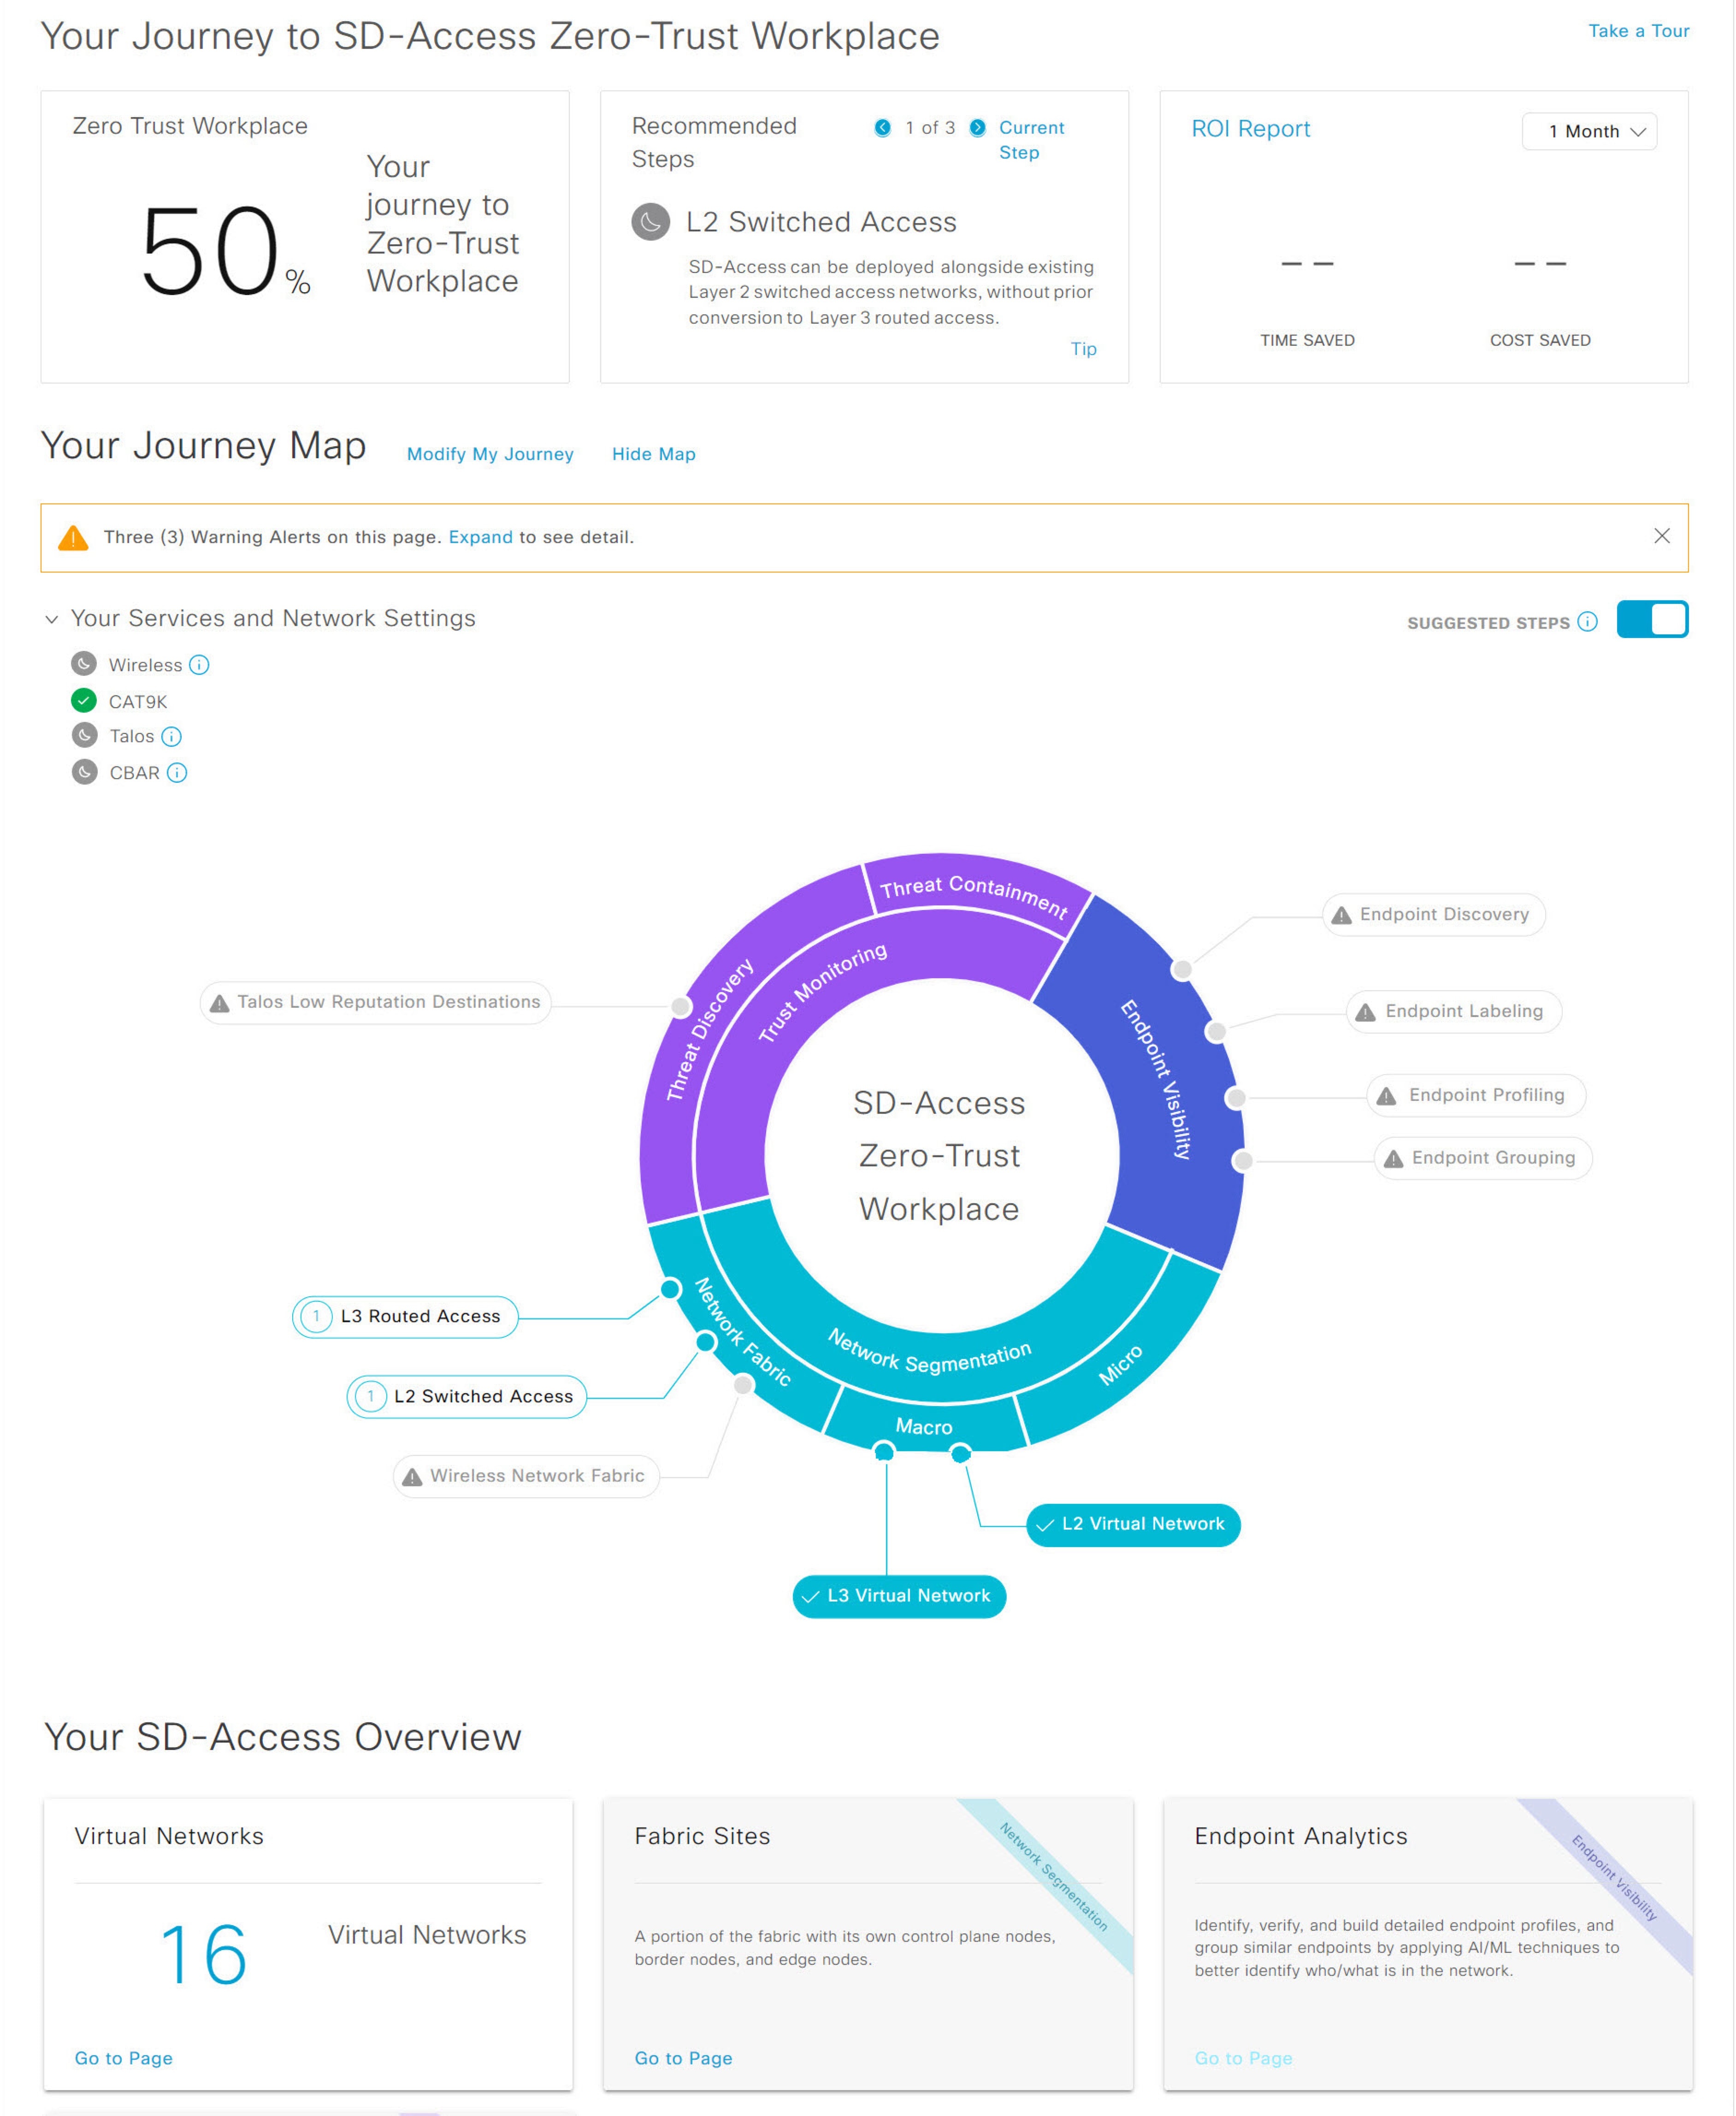 Day-n View of the Zero-Trust Overview Dashboard